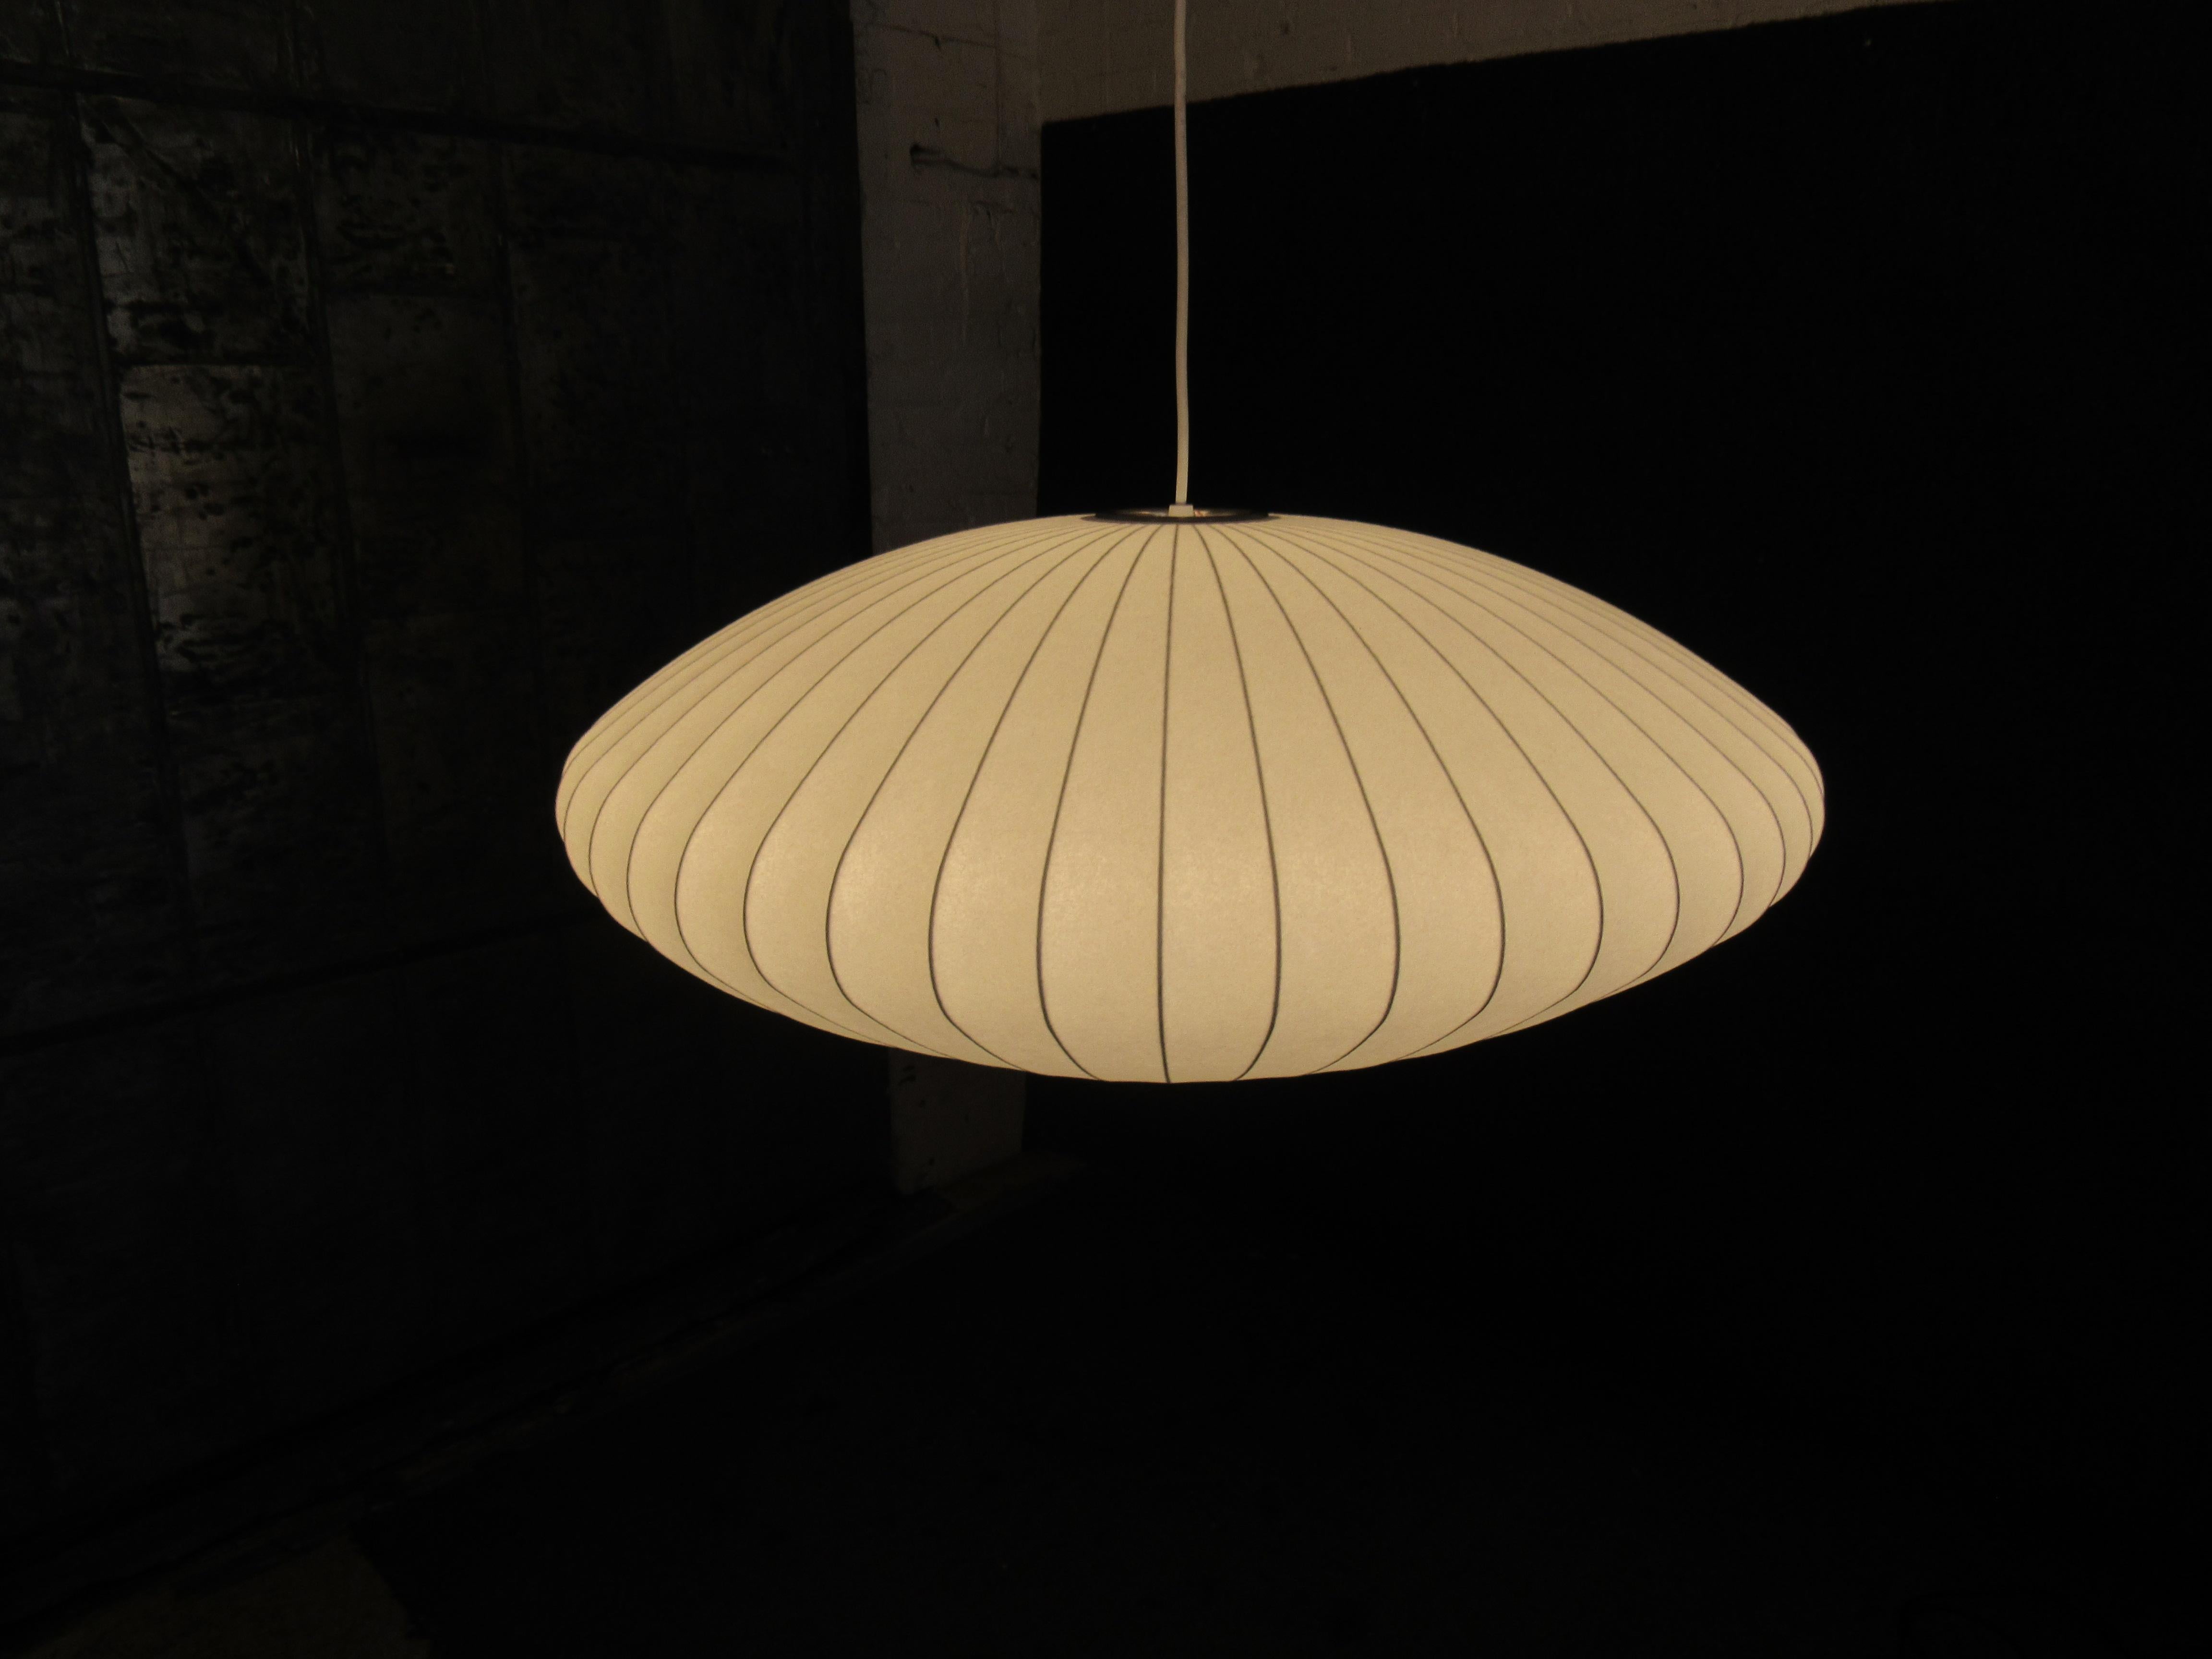 Make your lighting out of this world with the classic Gorge Nelson Saucer Bubble Pendant Lamp by Herman Miller! This modern, large model boasts an ample 35